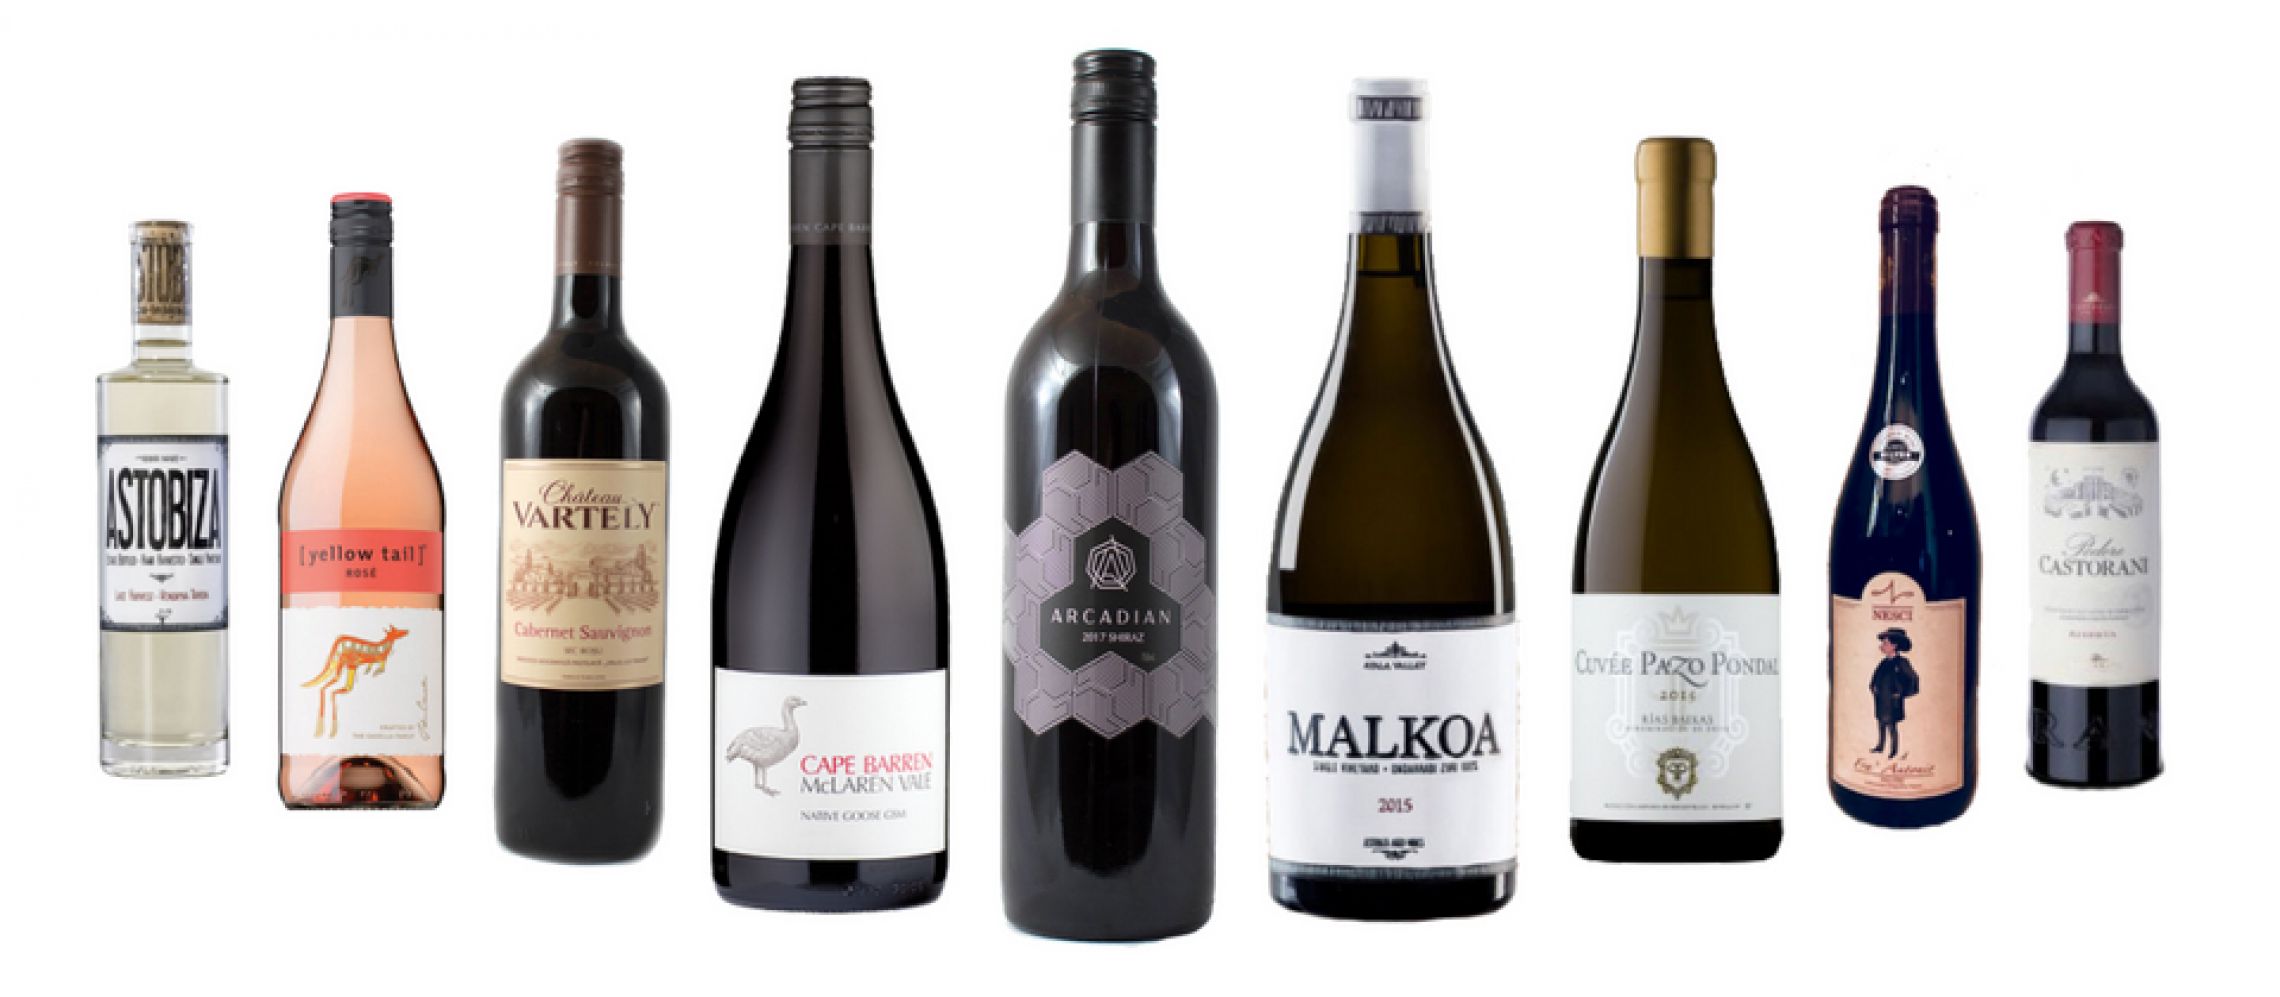 Photo for: Best Value Wines of 2018